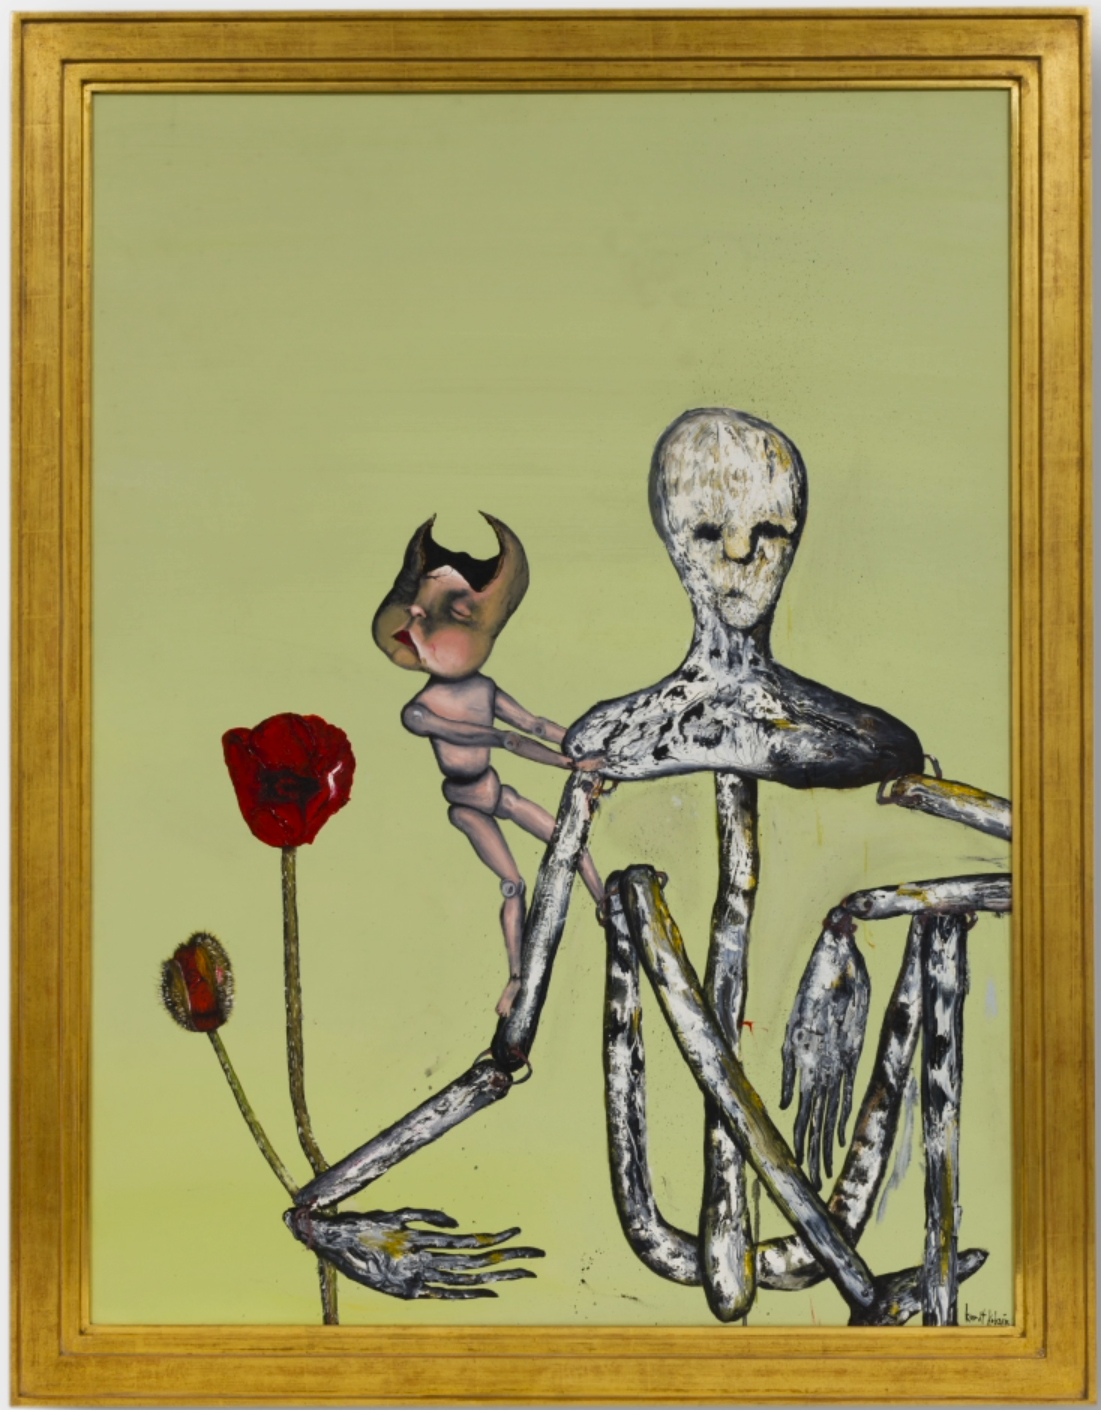 The painting is from the Incesticide album cover. It shows a twig-thin humanlike doll with textured greyish white skin seated on the left, with a small cherub-faced doll clinging to its right arm. The cherub has closed eyes, a cracked skull, and its face is turned away from the larger figure. To the left of these are red poppy flowers. The background is dull grey-green.